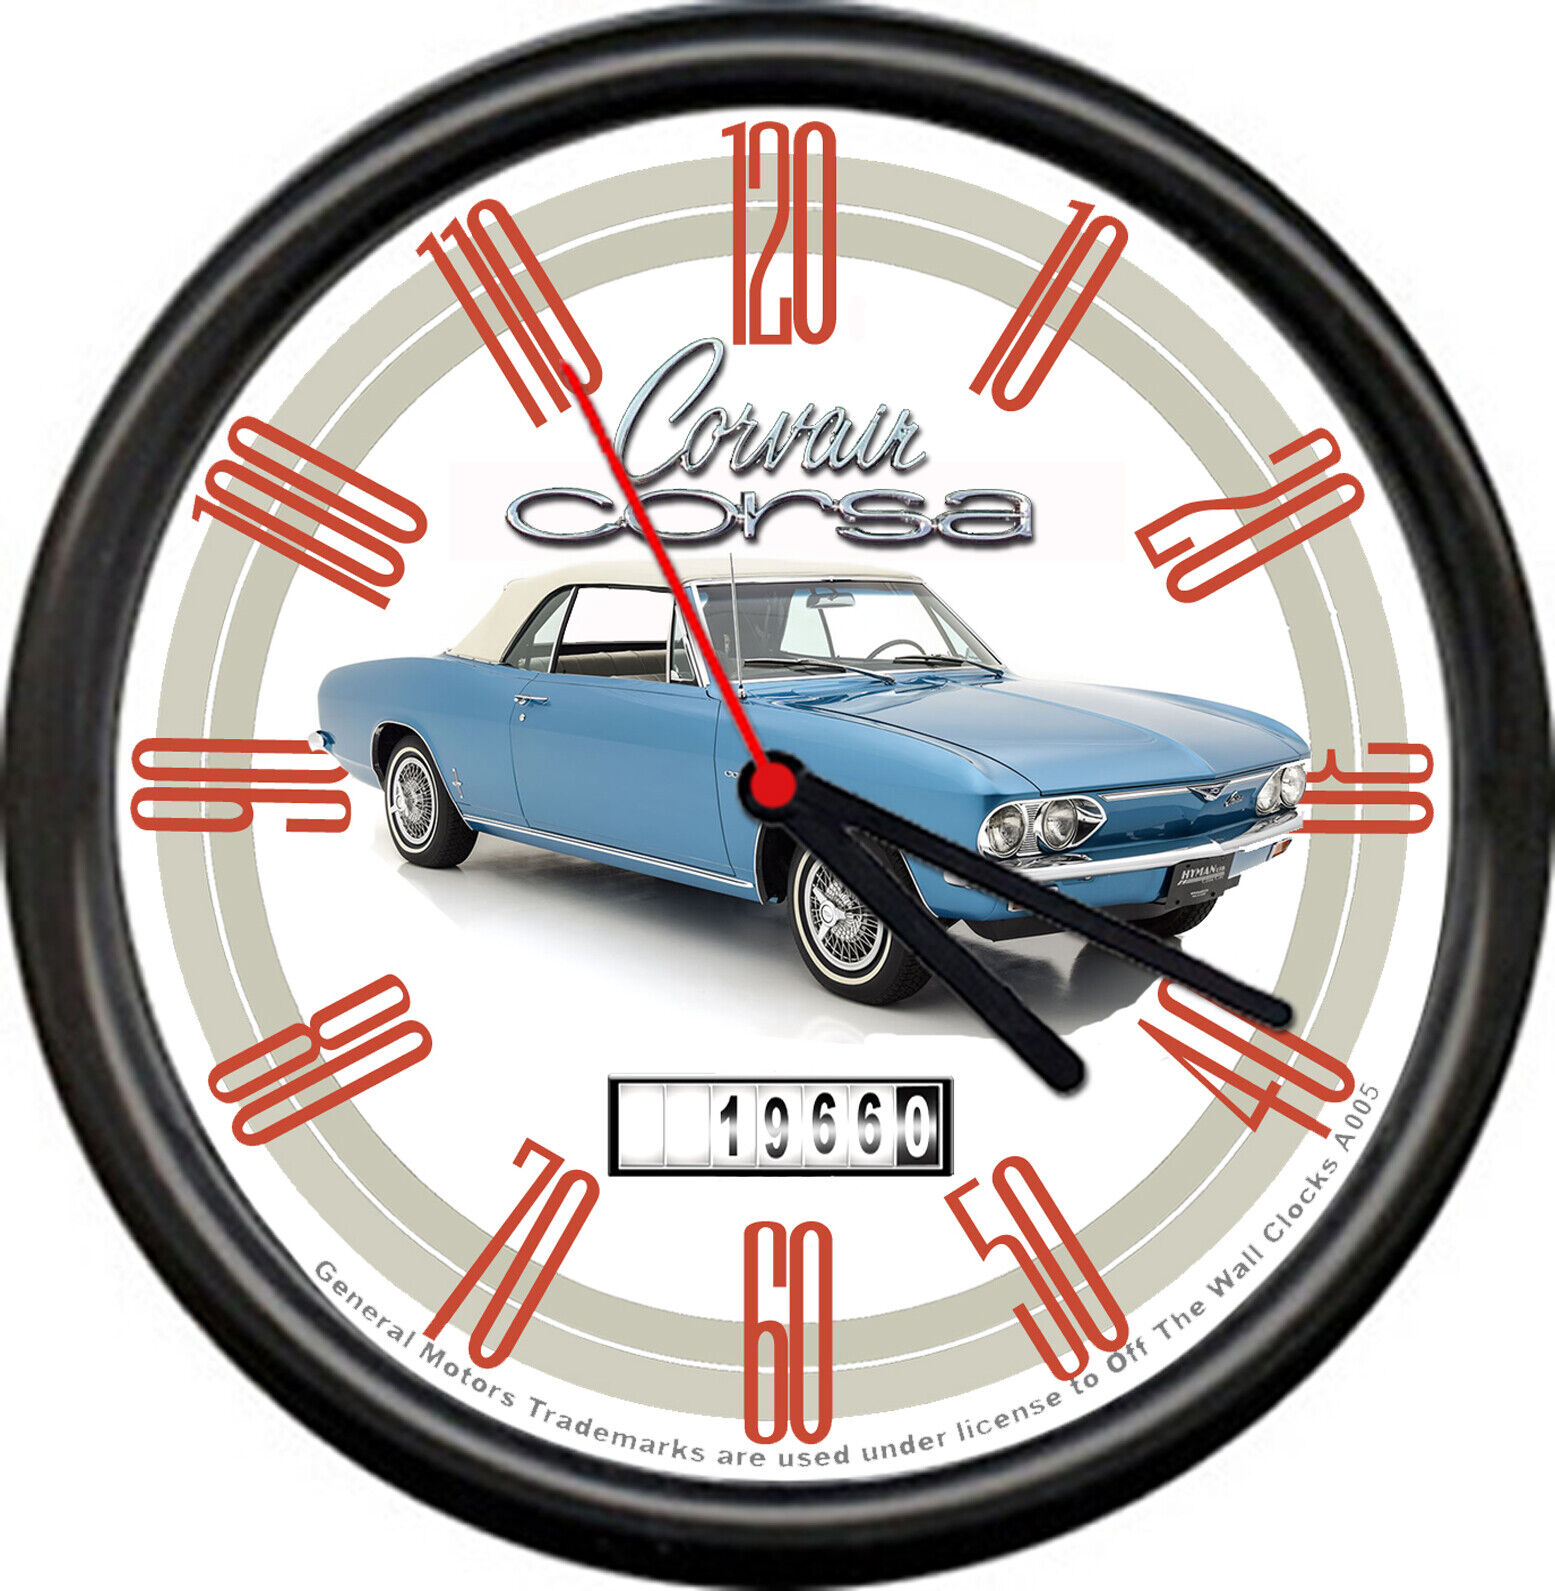 Licensed 1966 Chevy Corvair Corsa Rear Engine Car General Motors Sign Wall Clock